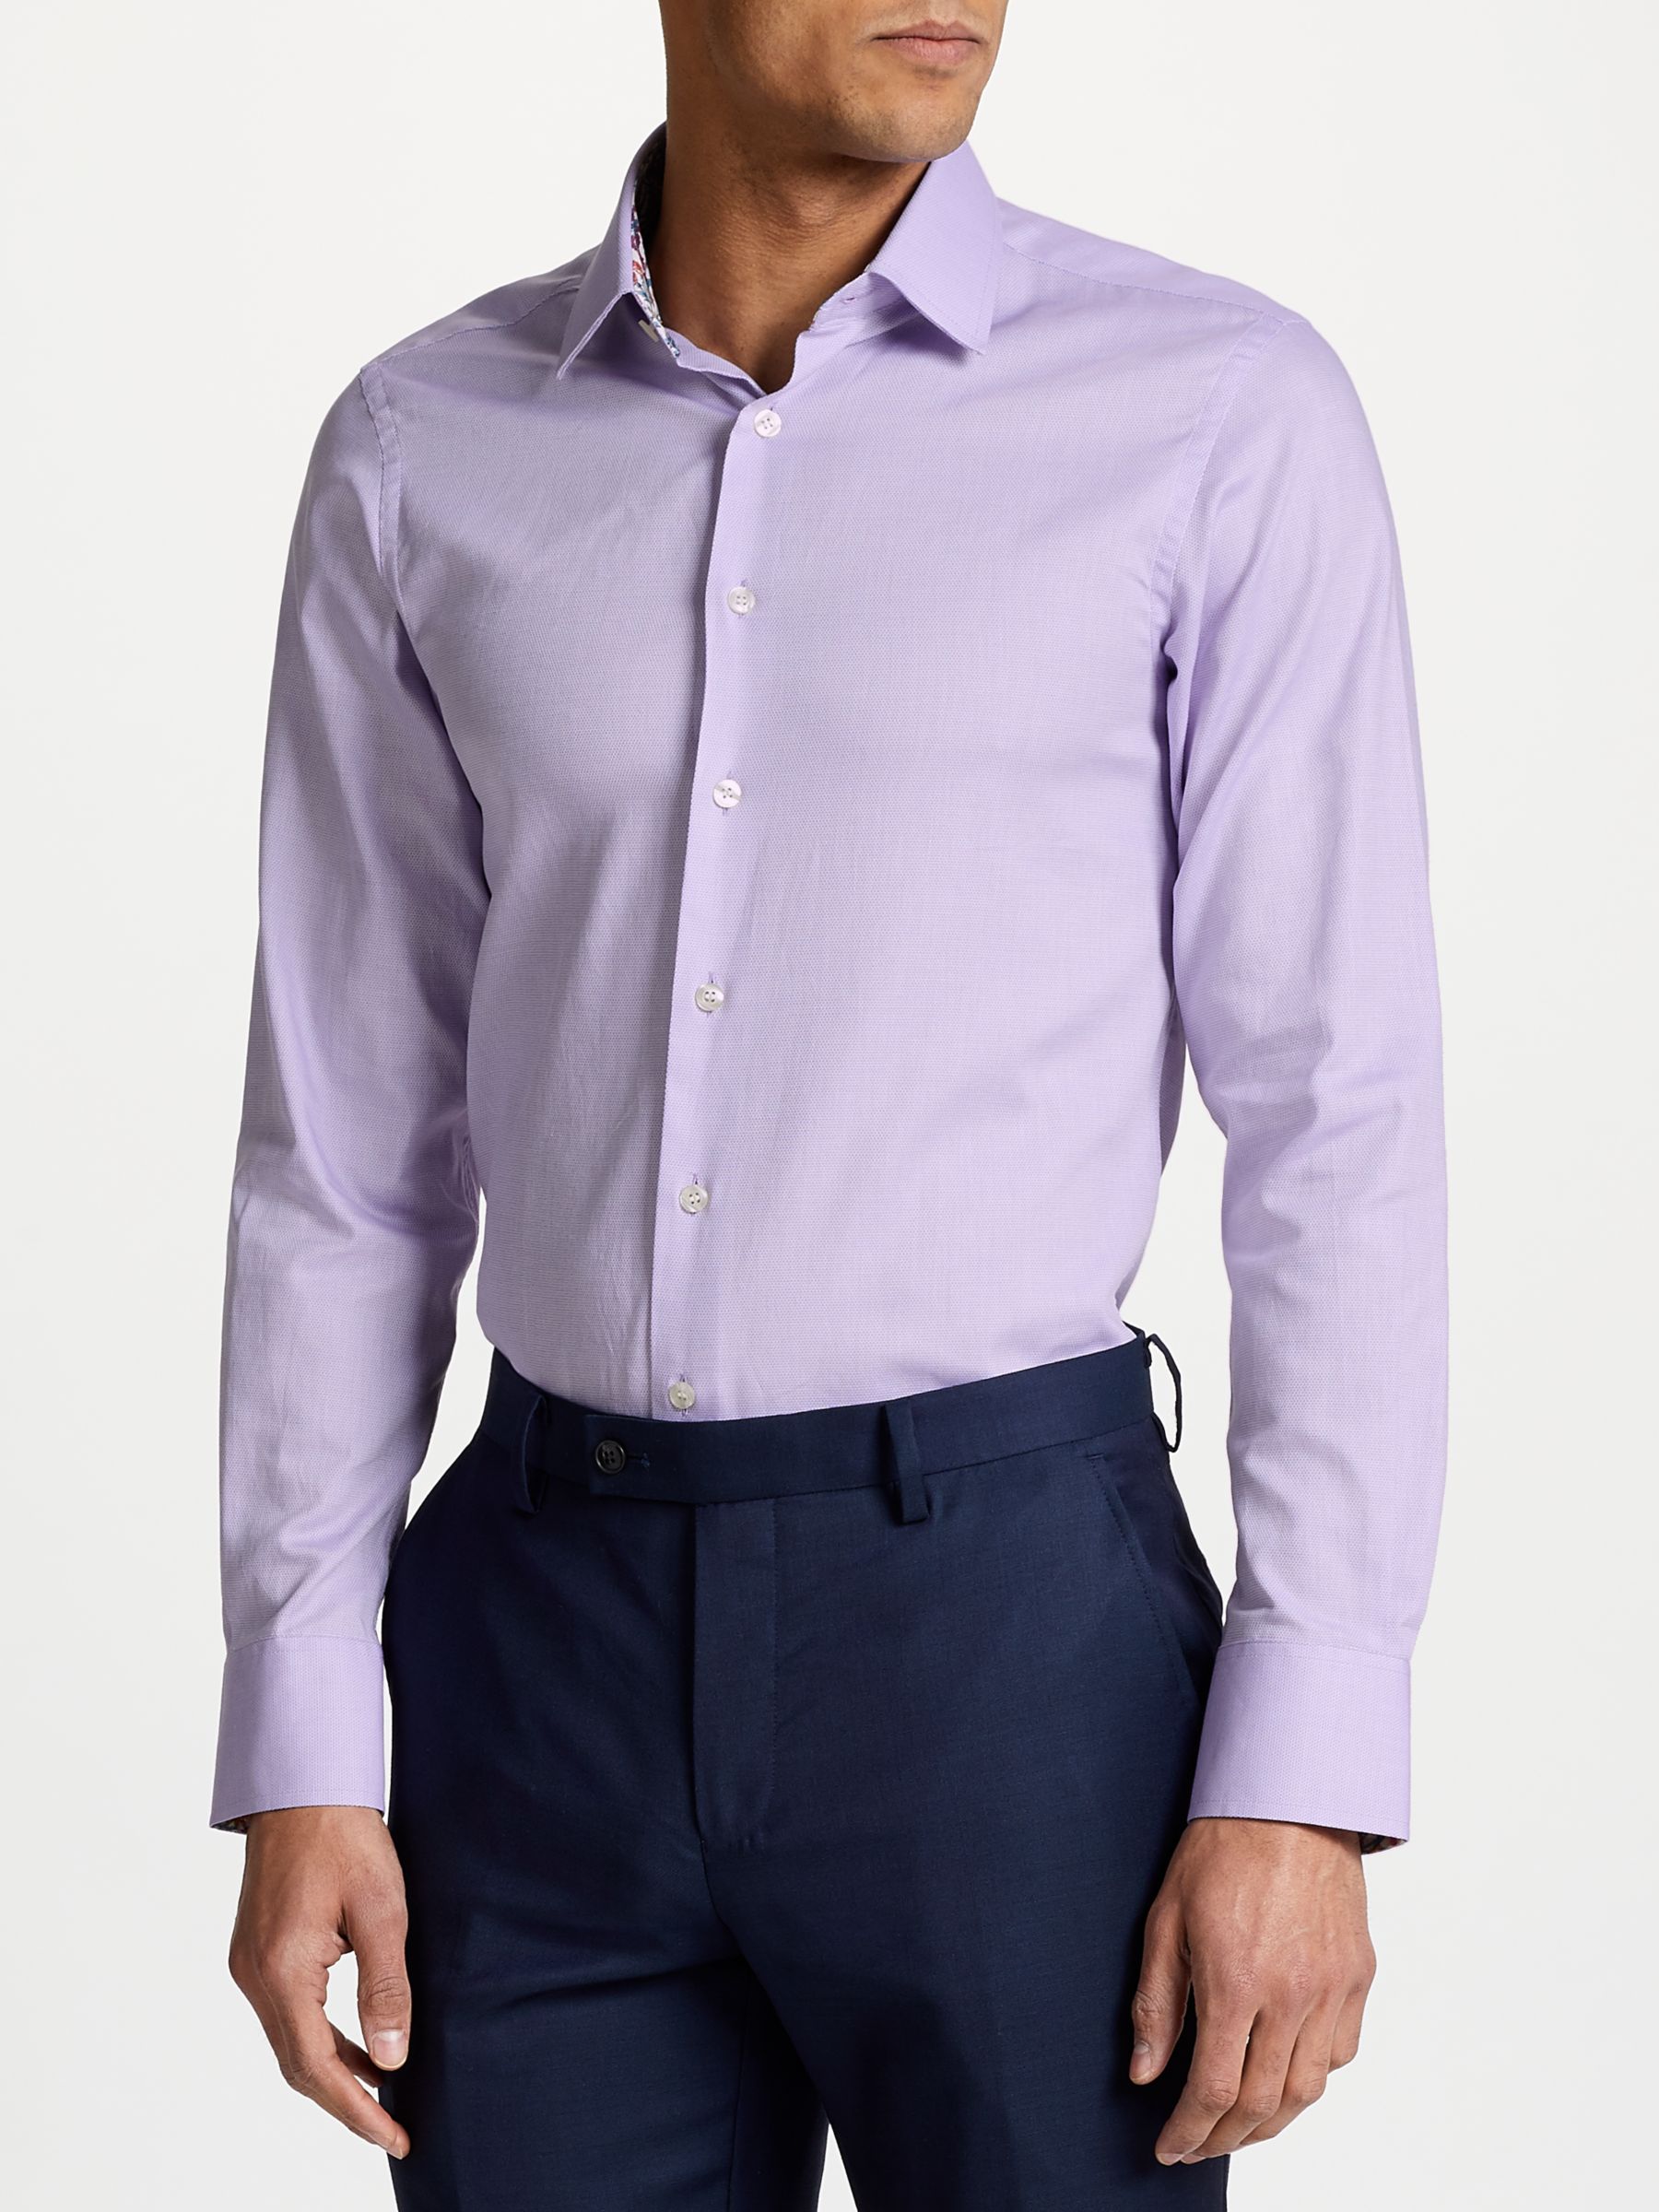 Smyth & Gibson Circle Weave 100s Cotton Slim Fit Shirt, Lilac, 15